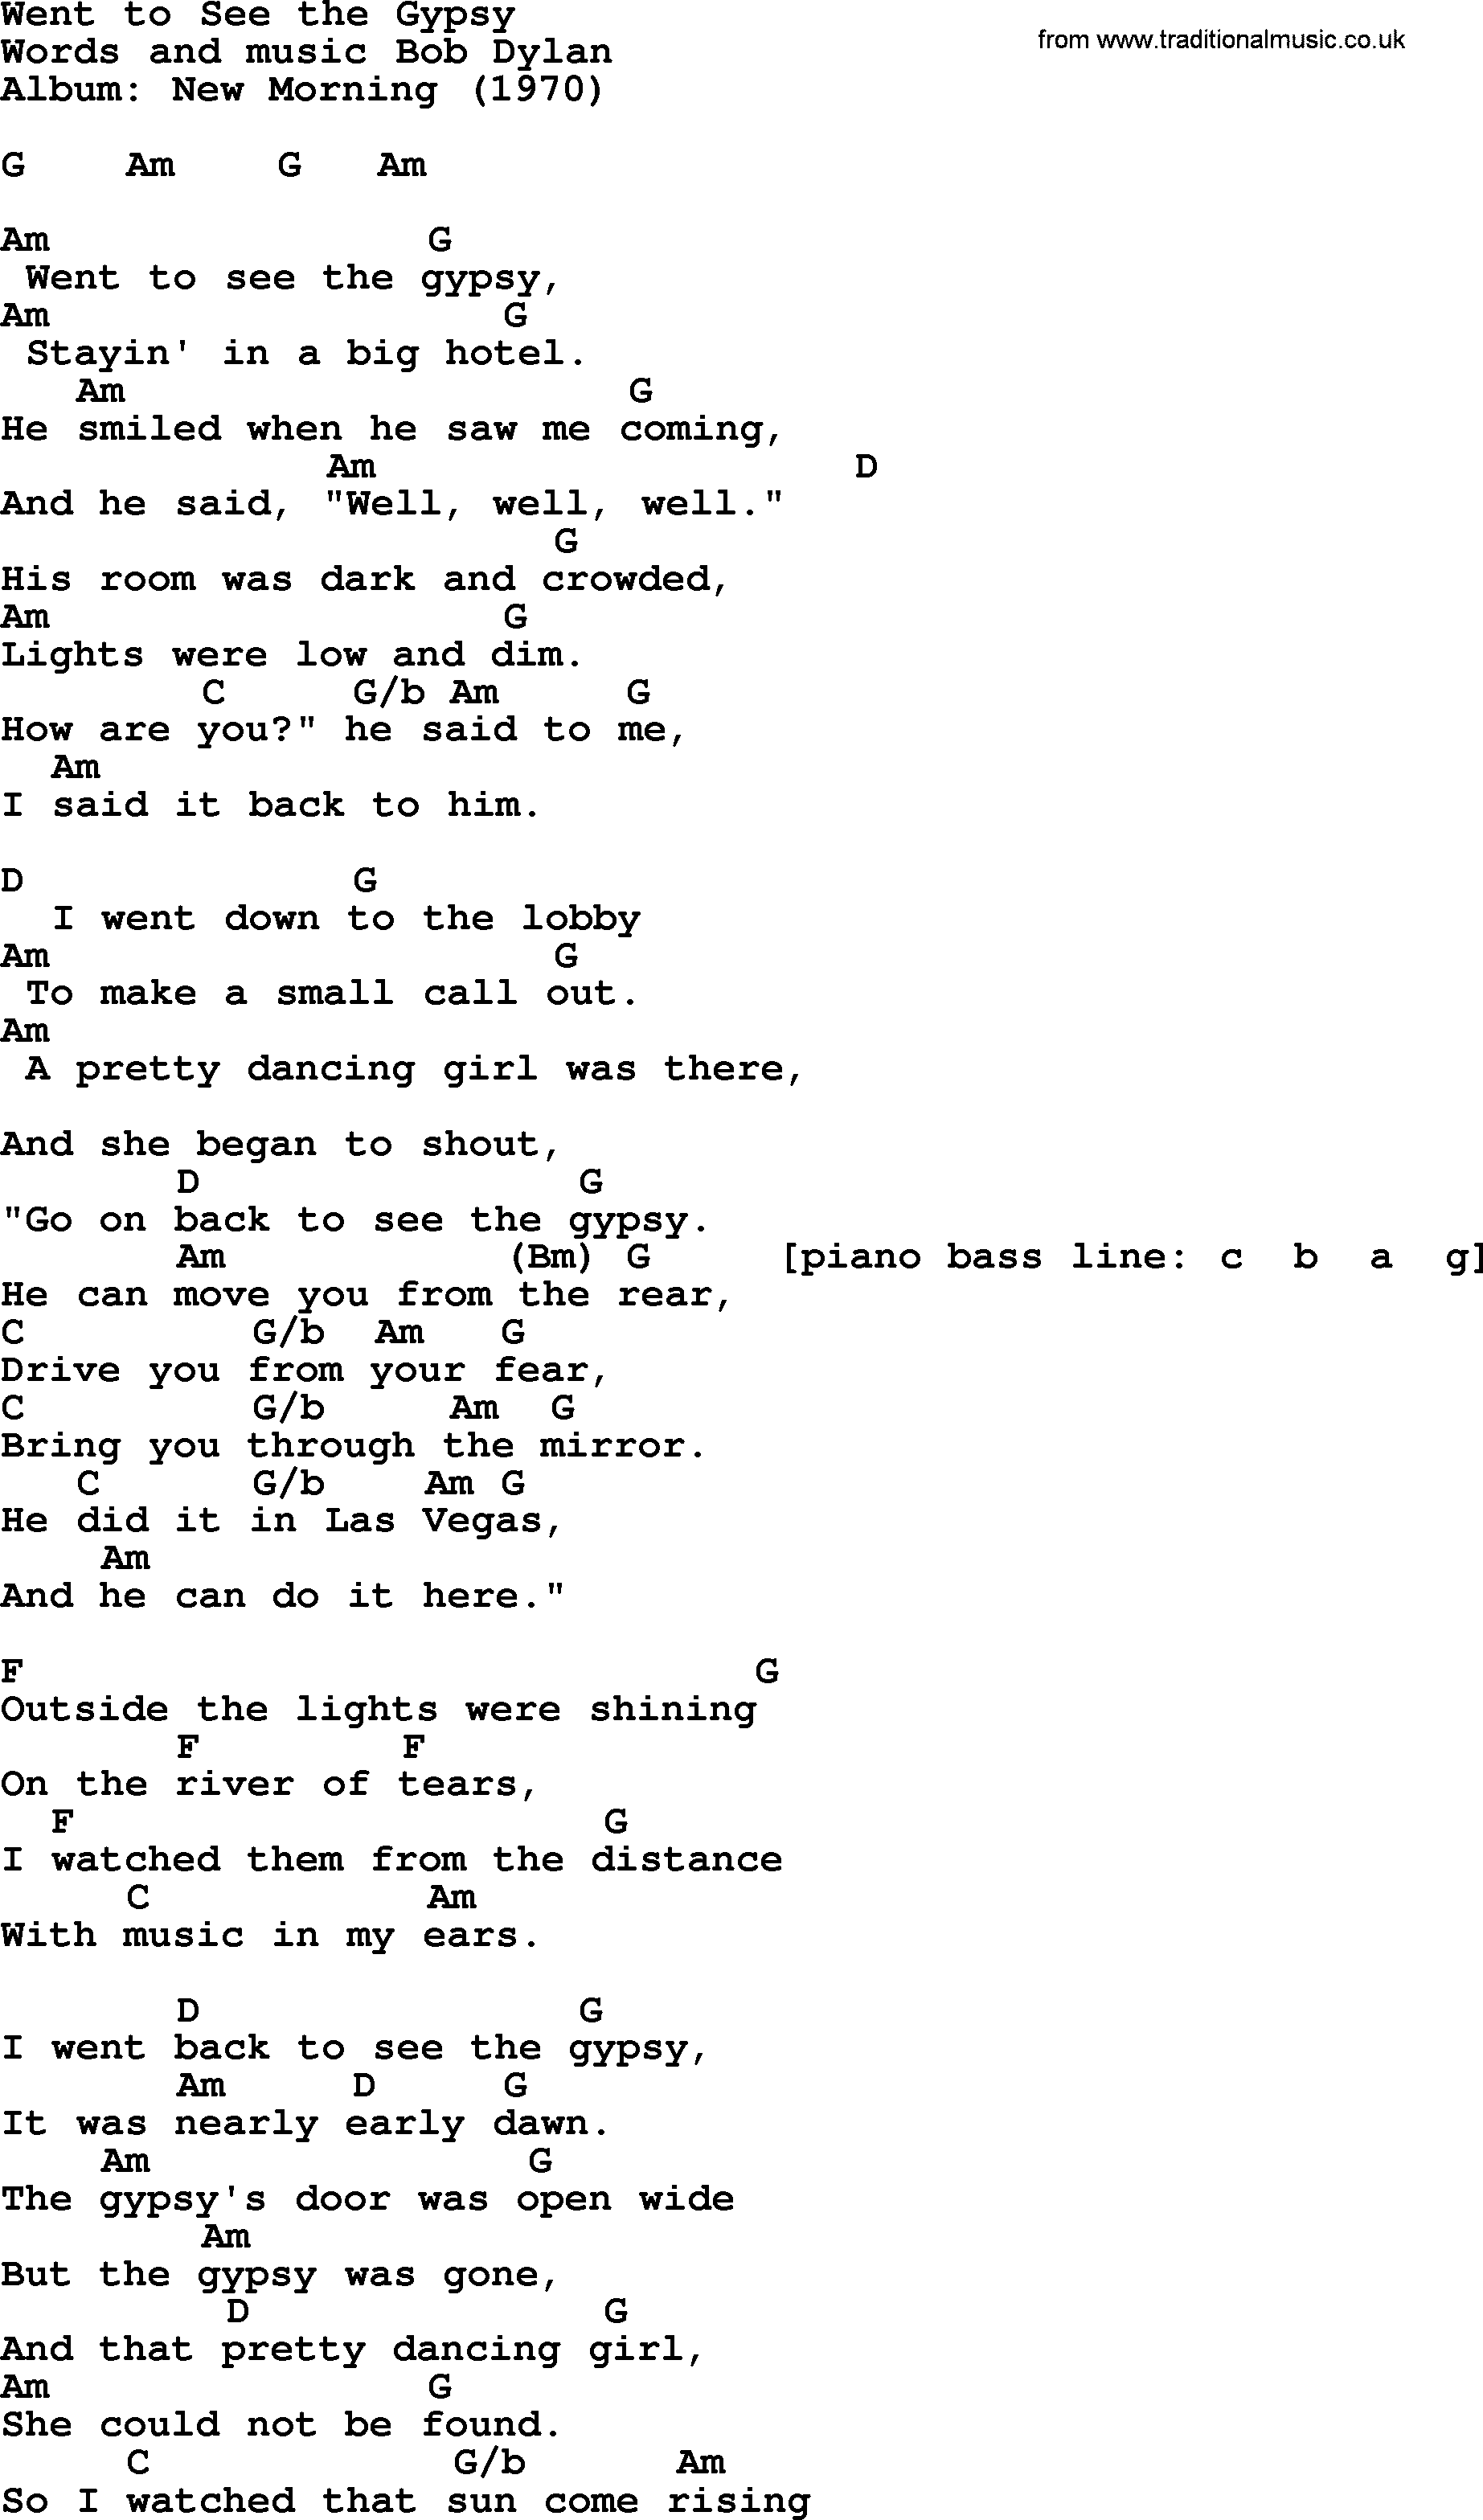 Bob Dylan song, lyrics with chords - Went to See the Gypsy